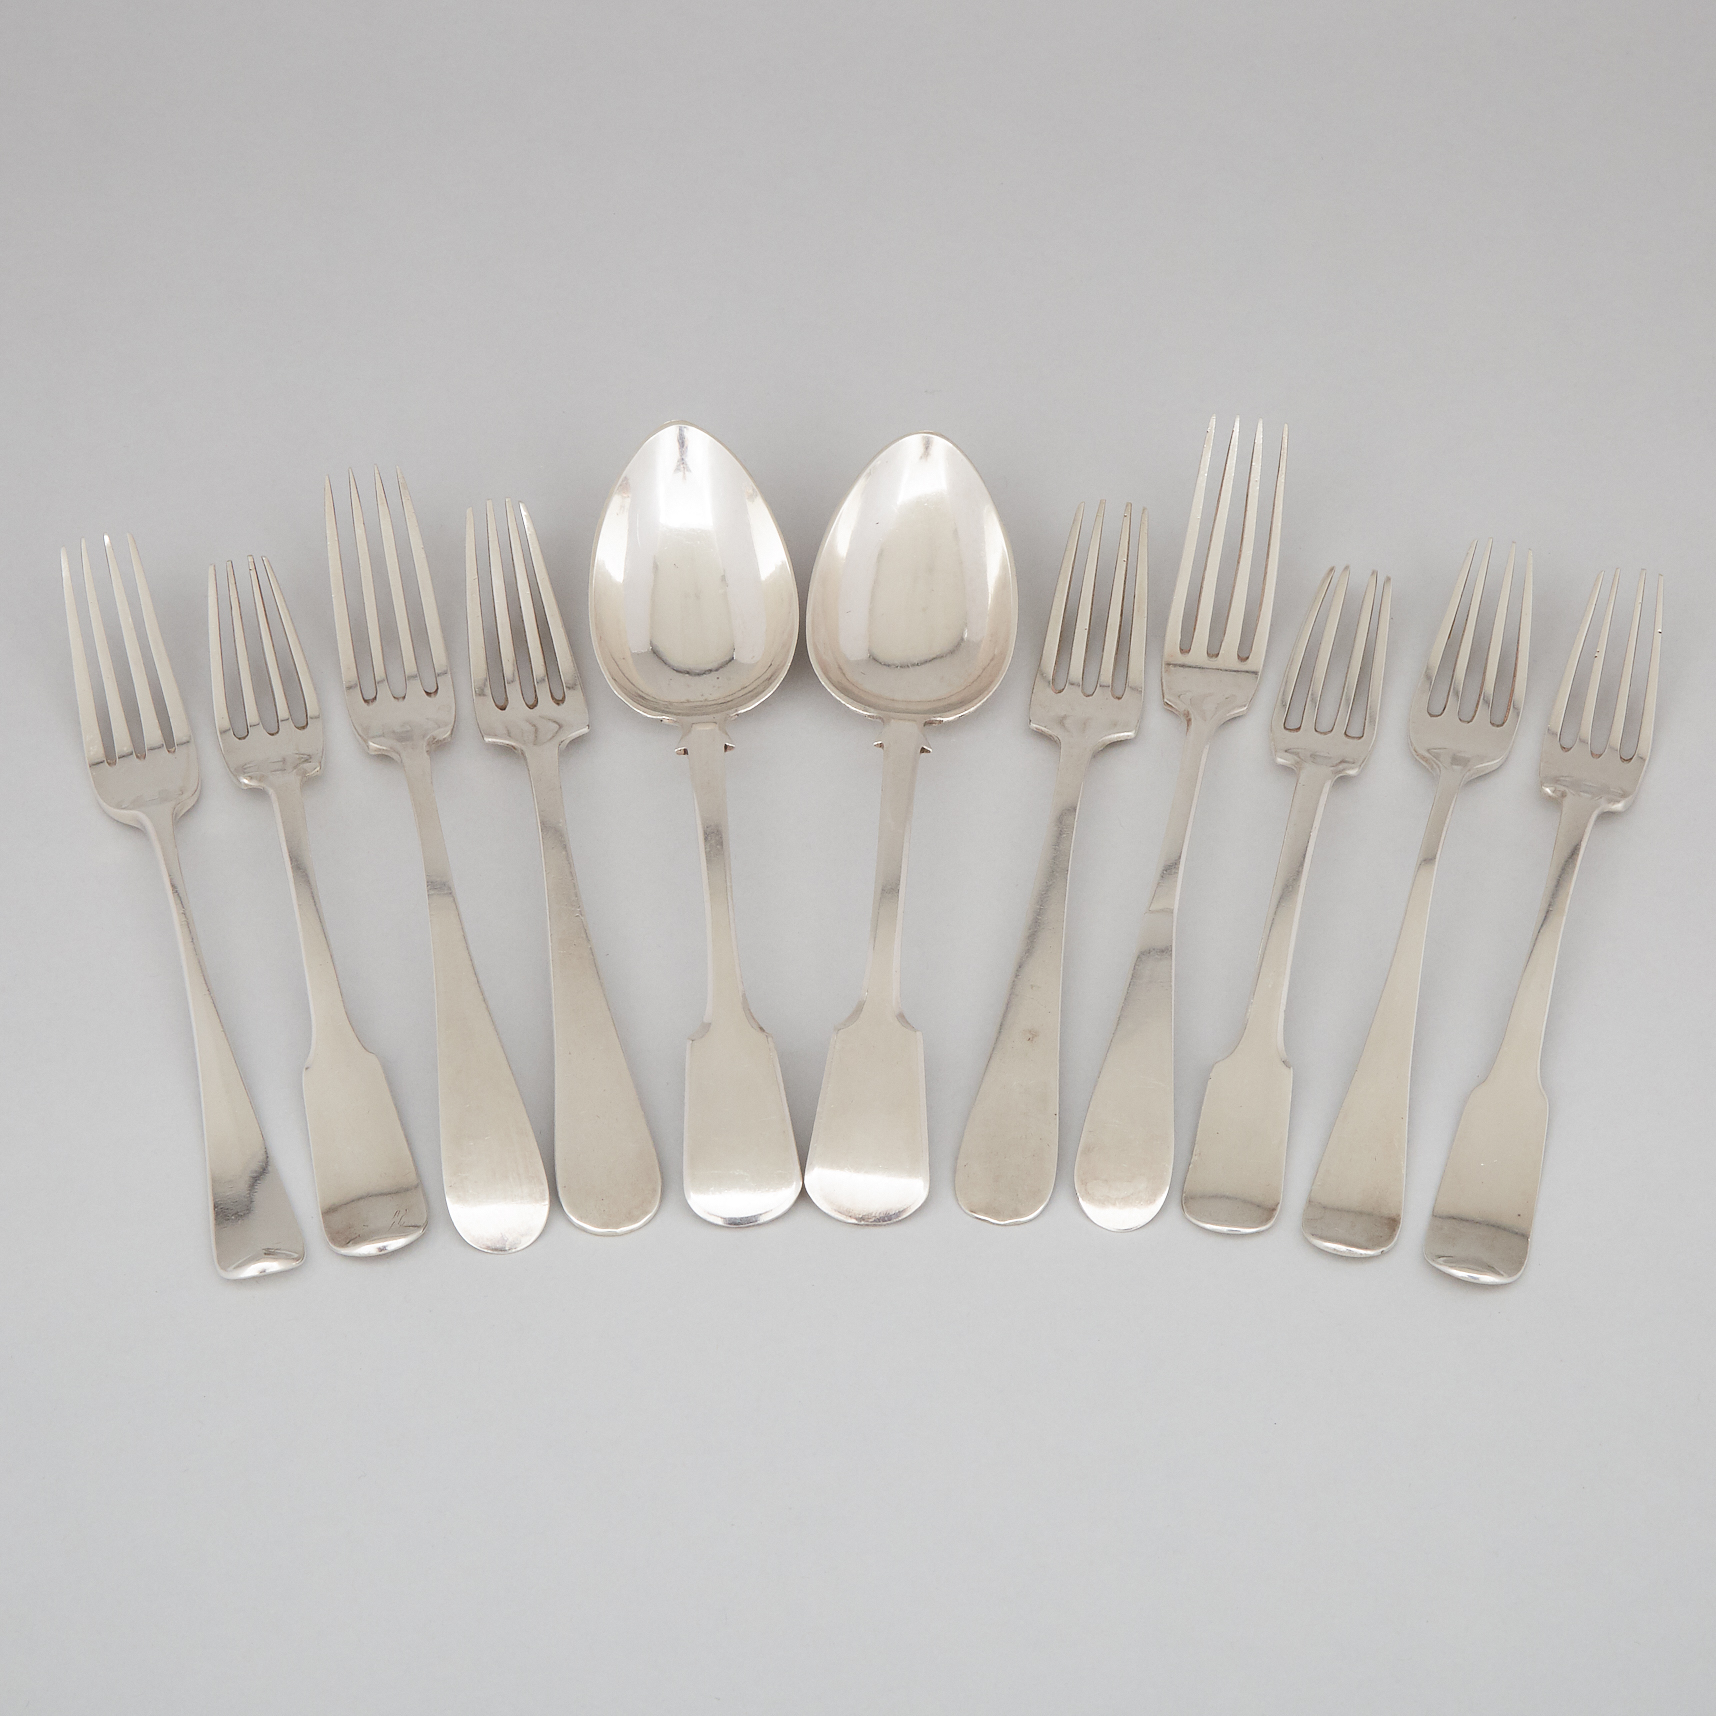 Group of Mainly Maltese Silver Flatware, late 18th/19th century